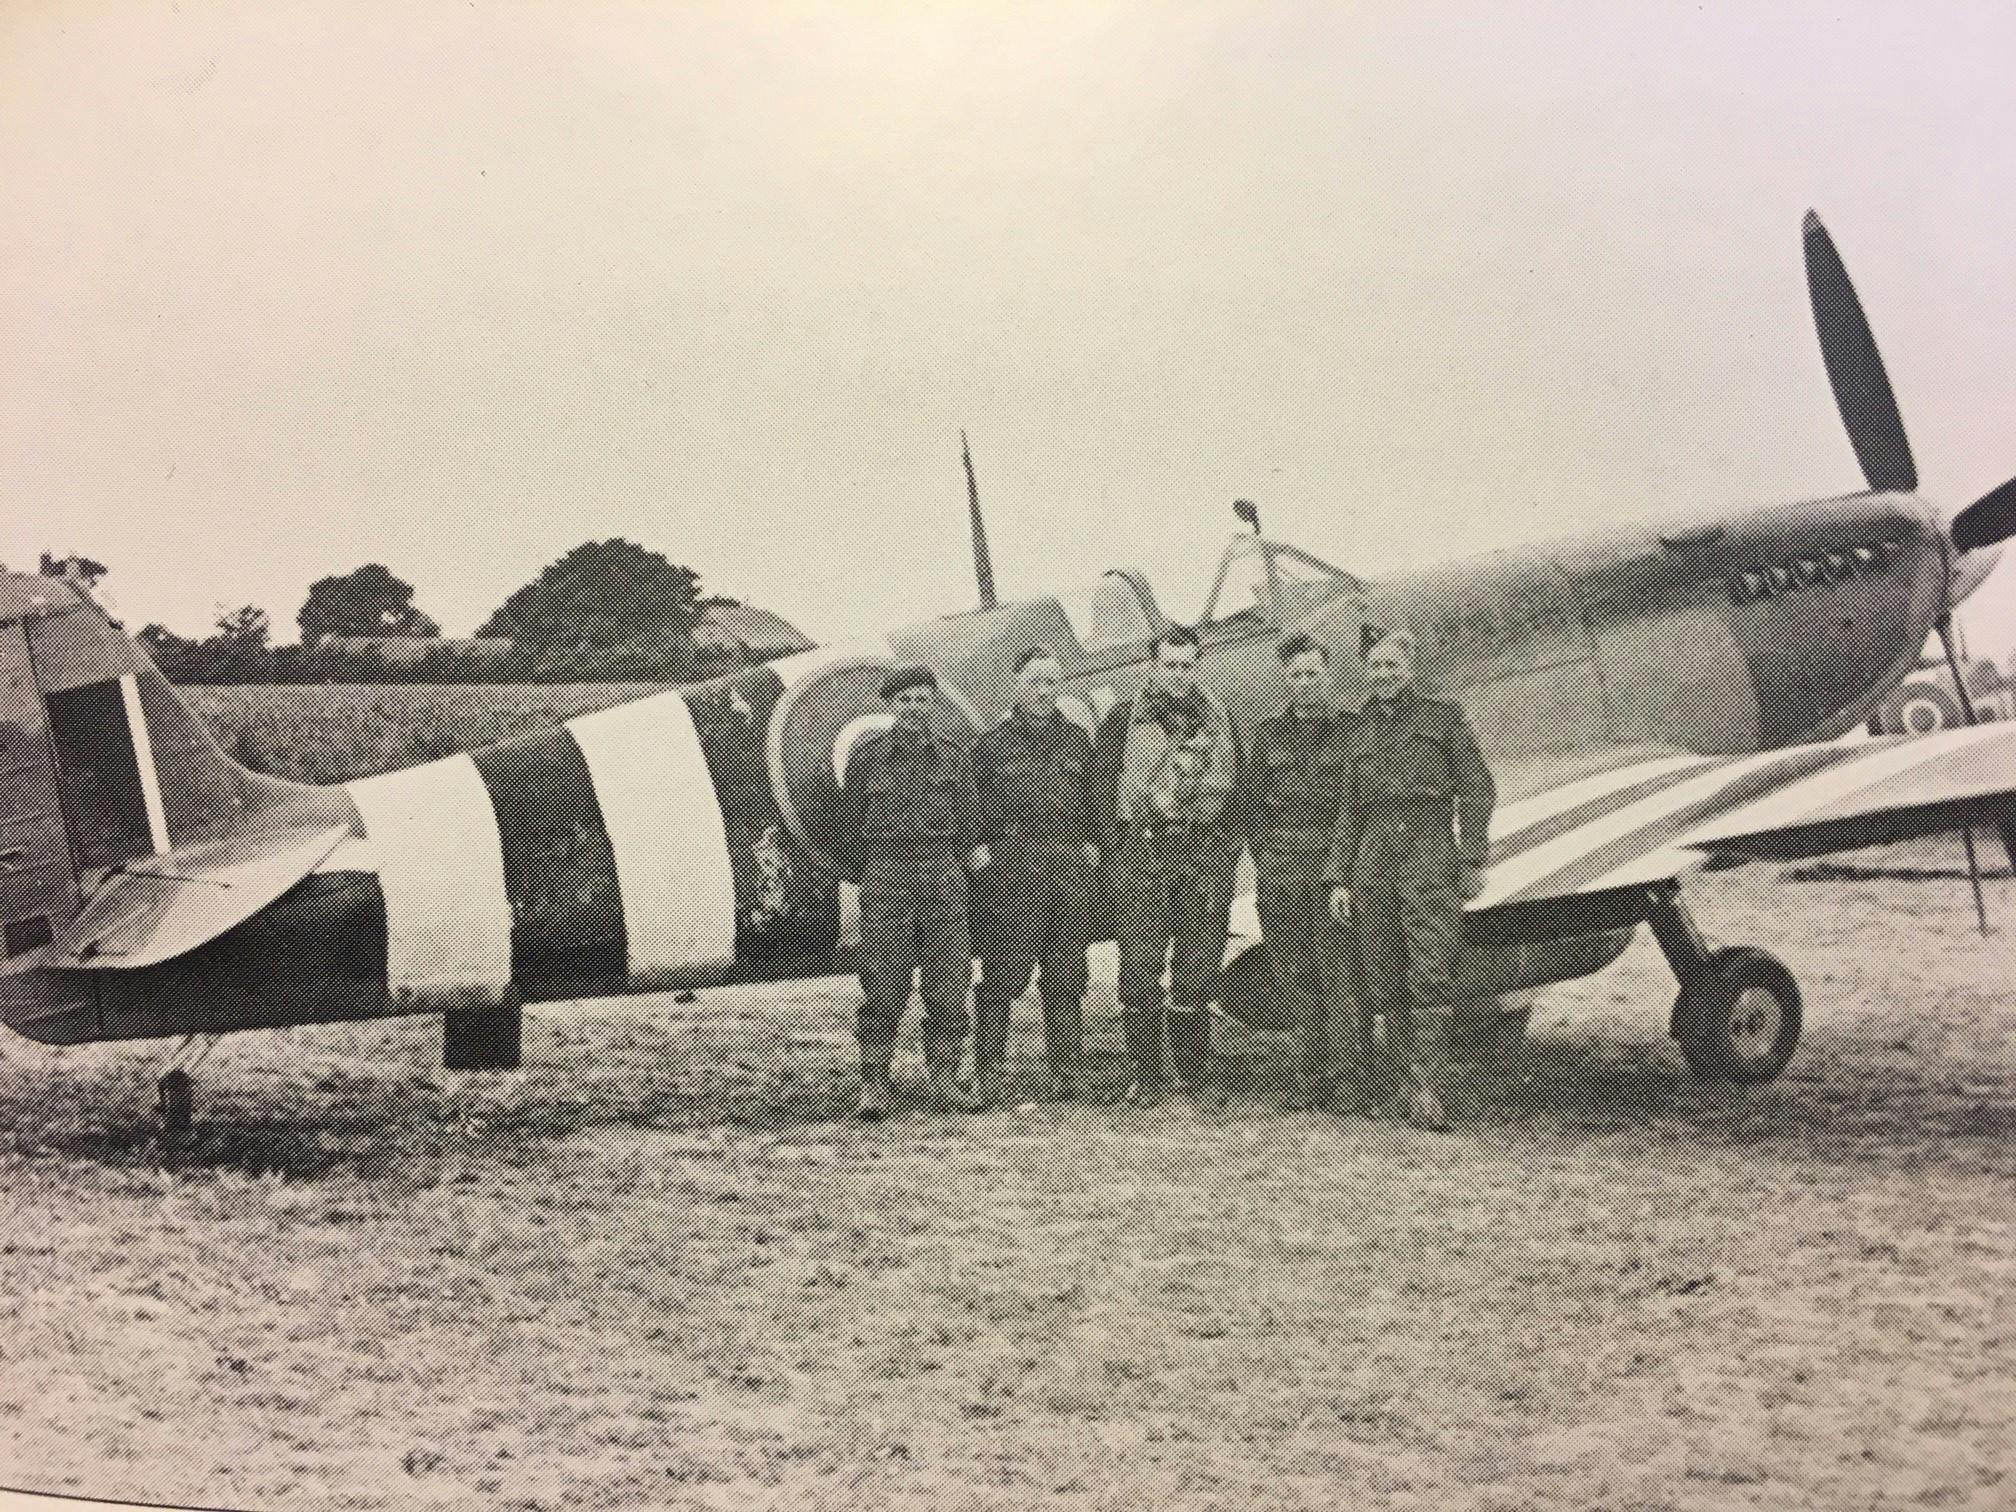 Image of the ALG Selsey airmen alongside a spitfire painted with black and white stripes across its wings and fusalage called Invasion Stripes to fend off friendly fire during the Normandy landings and D-Day 